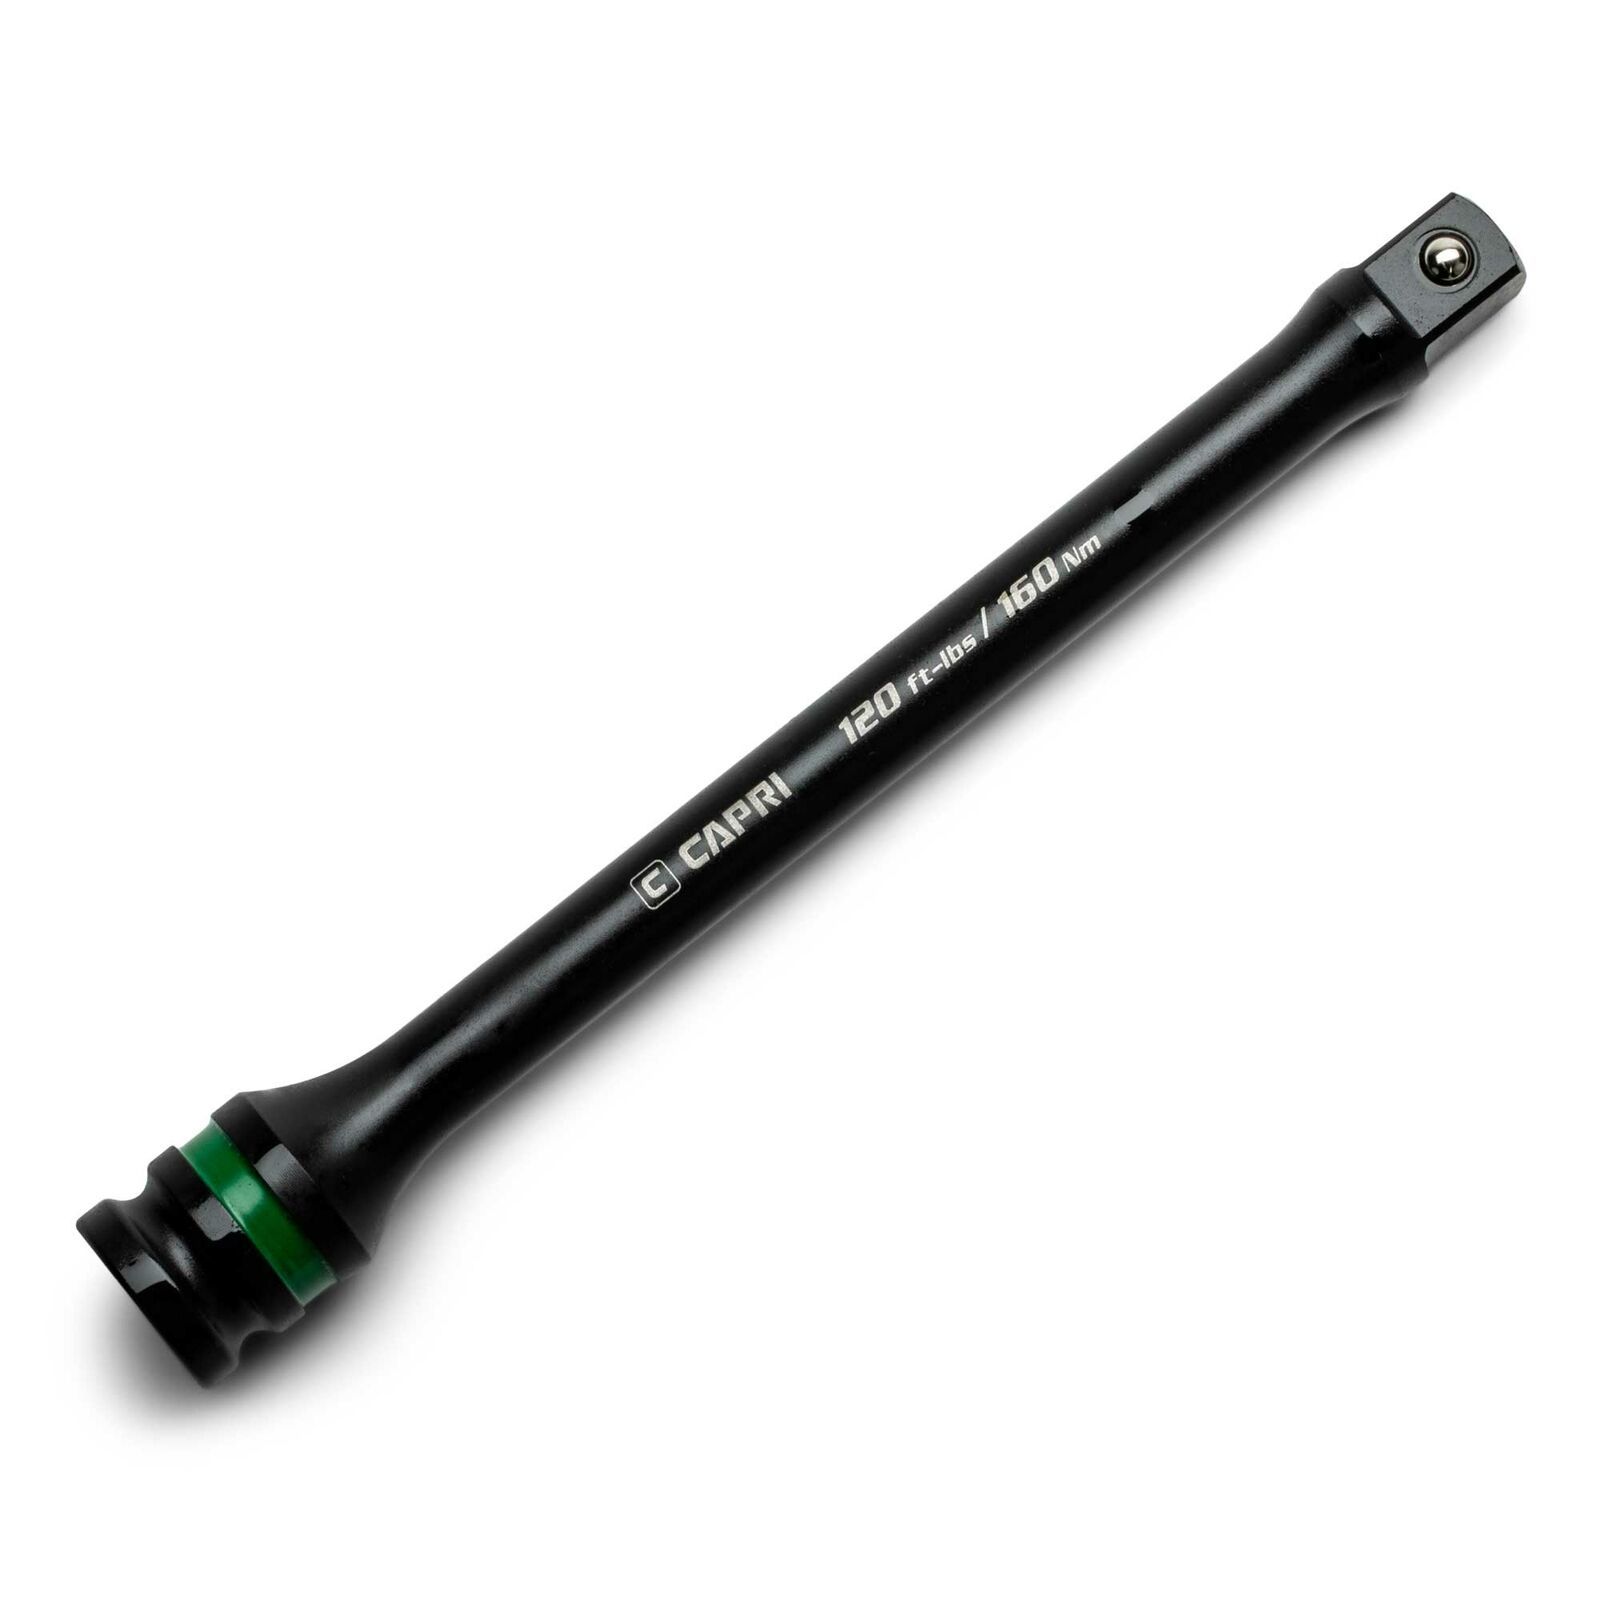 Primary image for Capri Tools 1/2 in. Drive 120 ft/lbs Torque Limiting Extension Bar